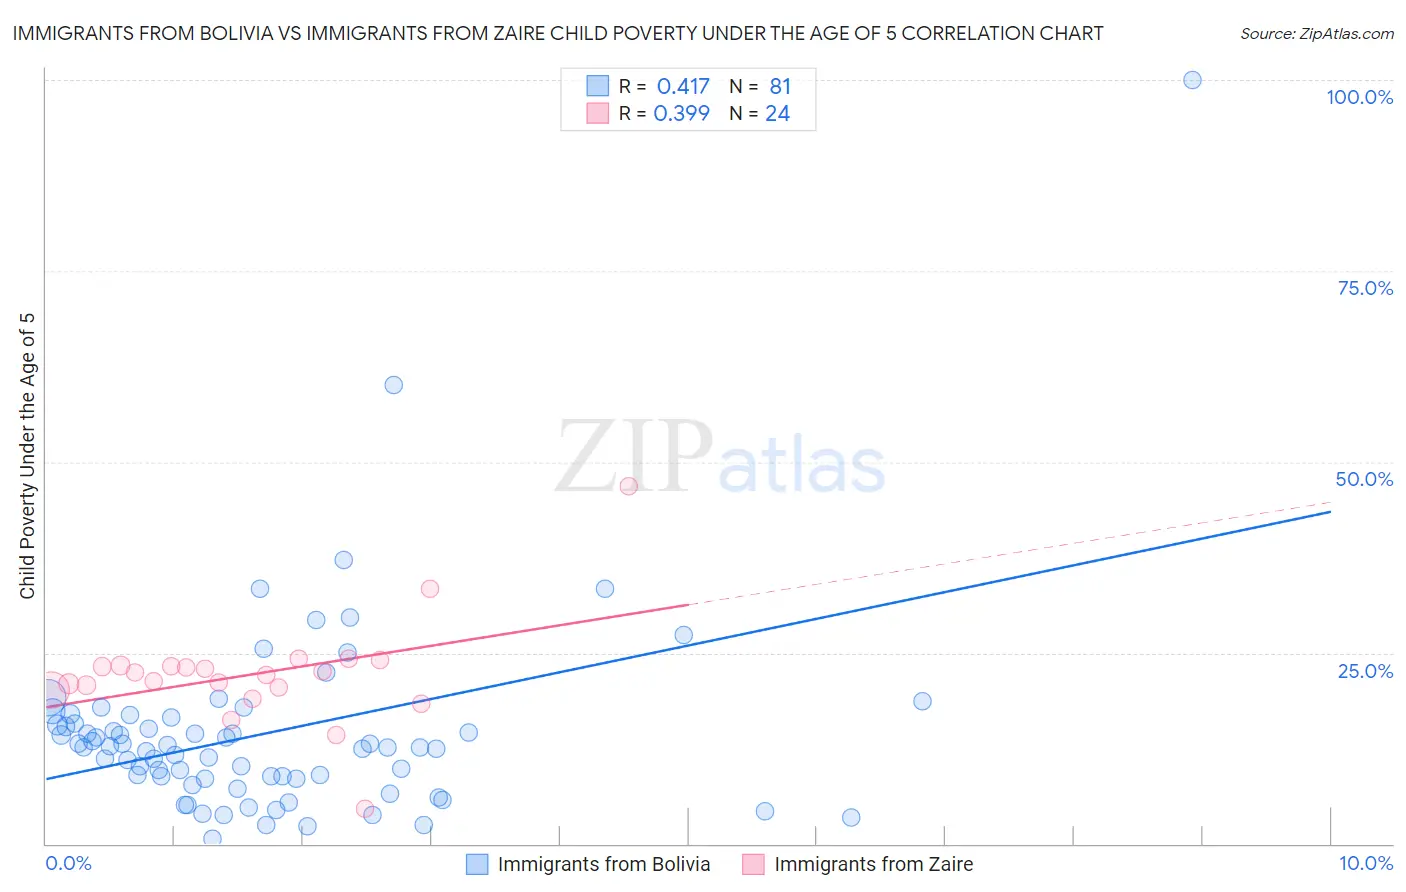 Immigrants from Bolivia vs Immigrants from Zaire Child Poverty Under the Age of 5